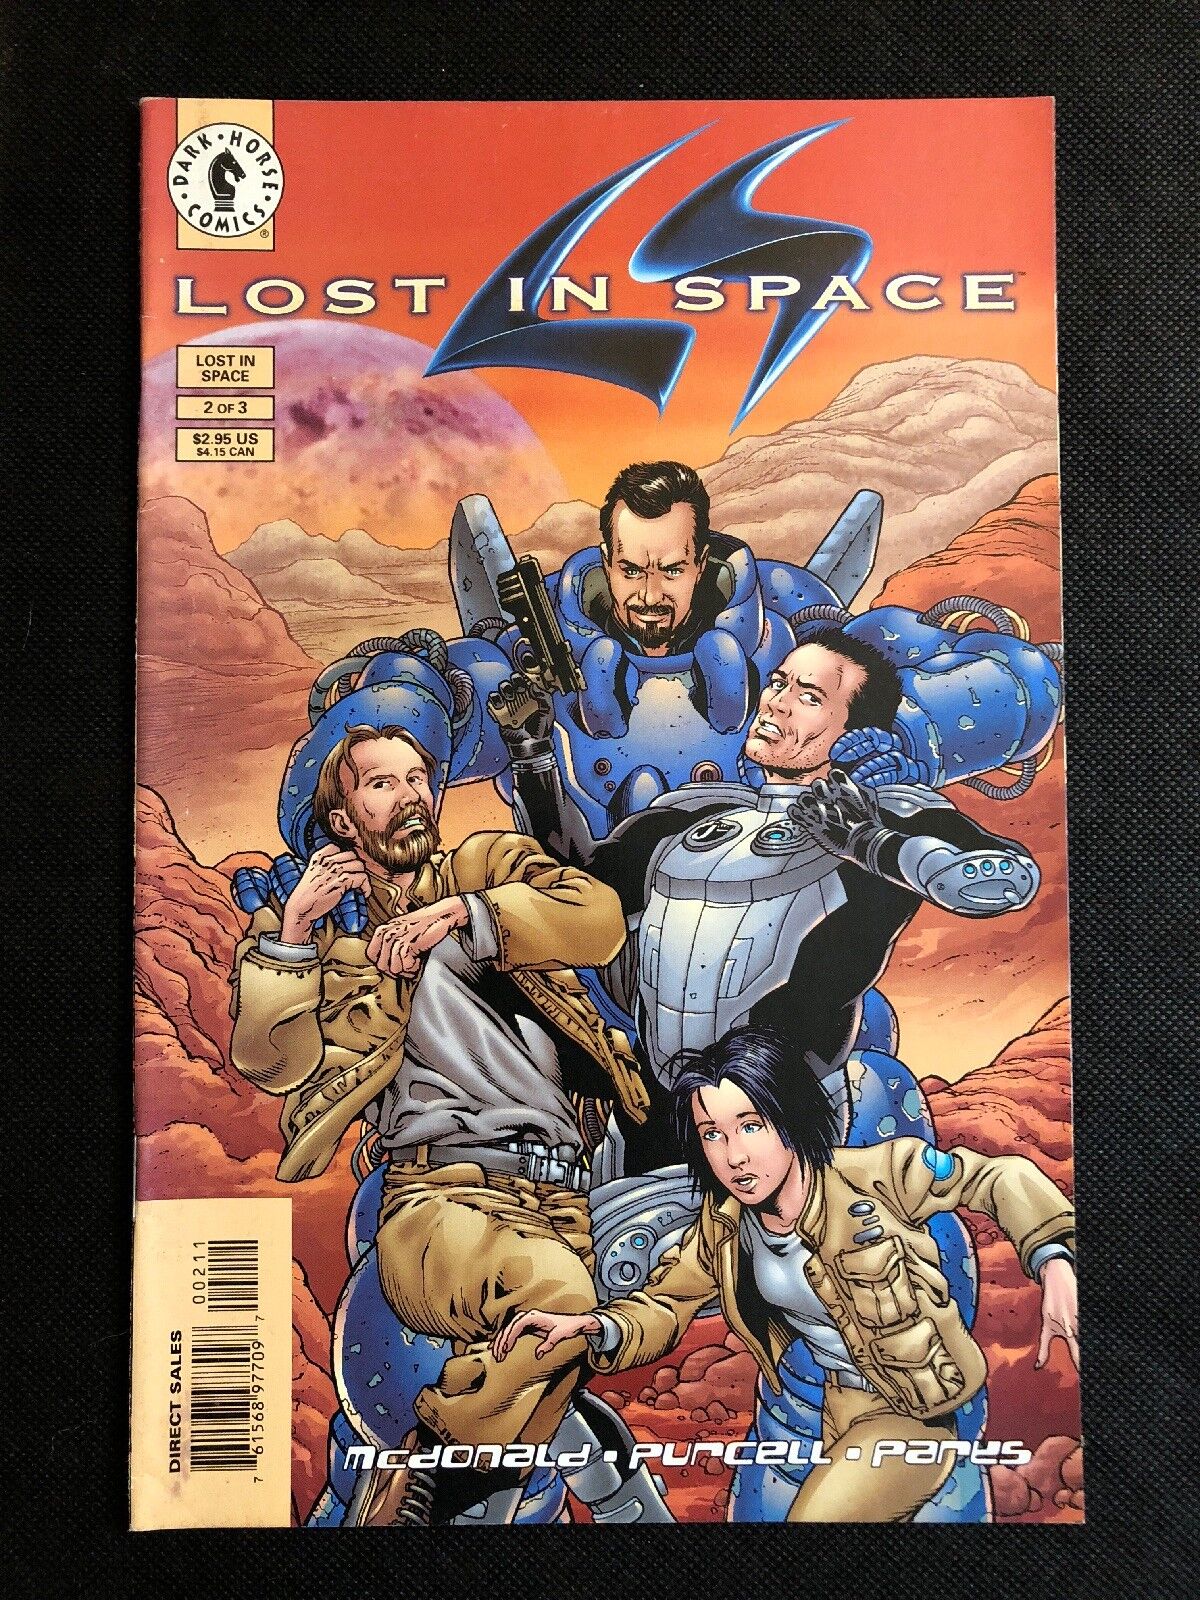 Lost In Space Issue #2 of 3 (Dark Horse Comics) VF-NM